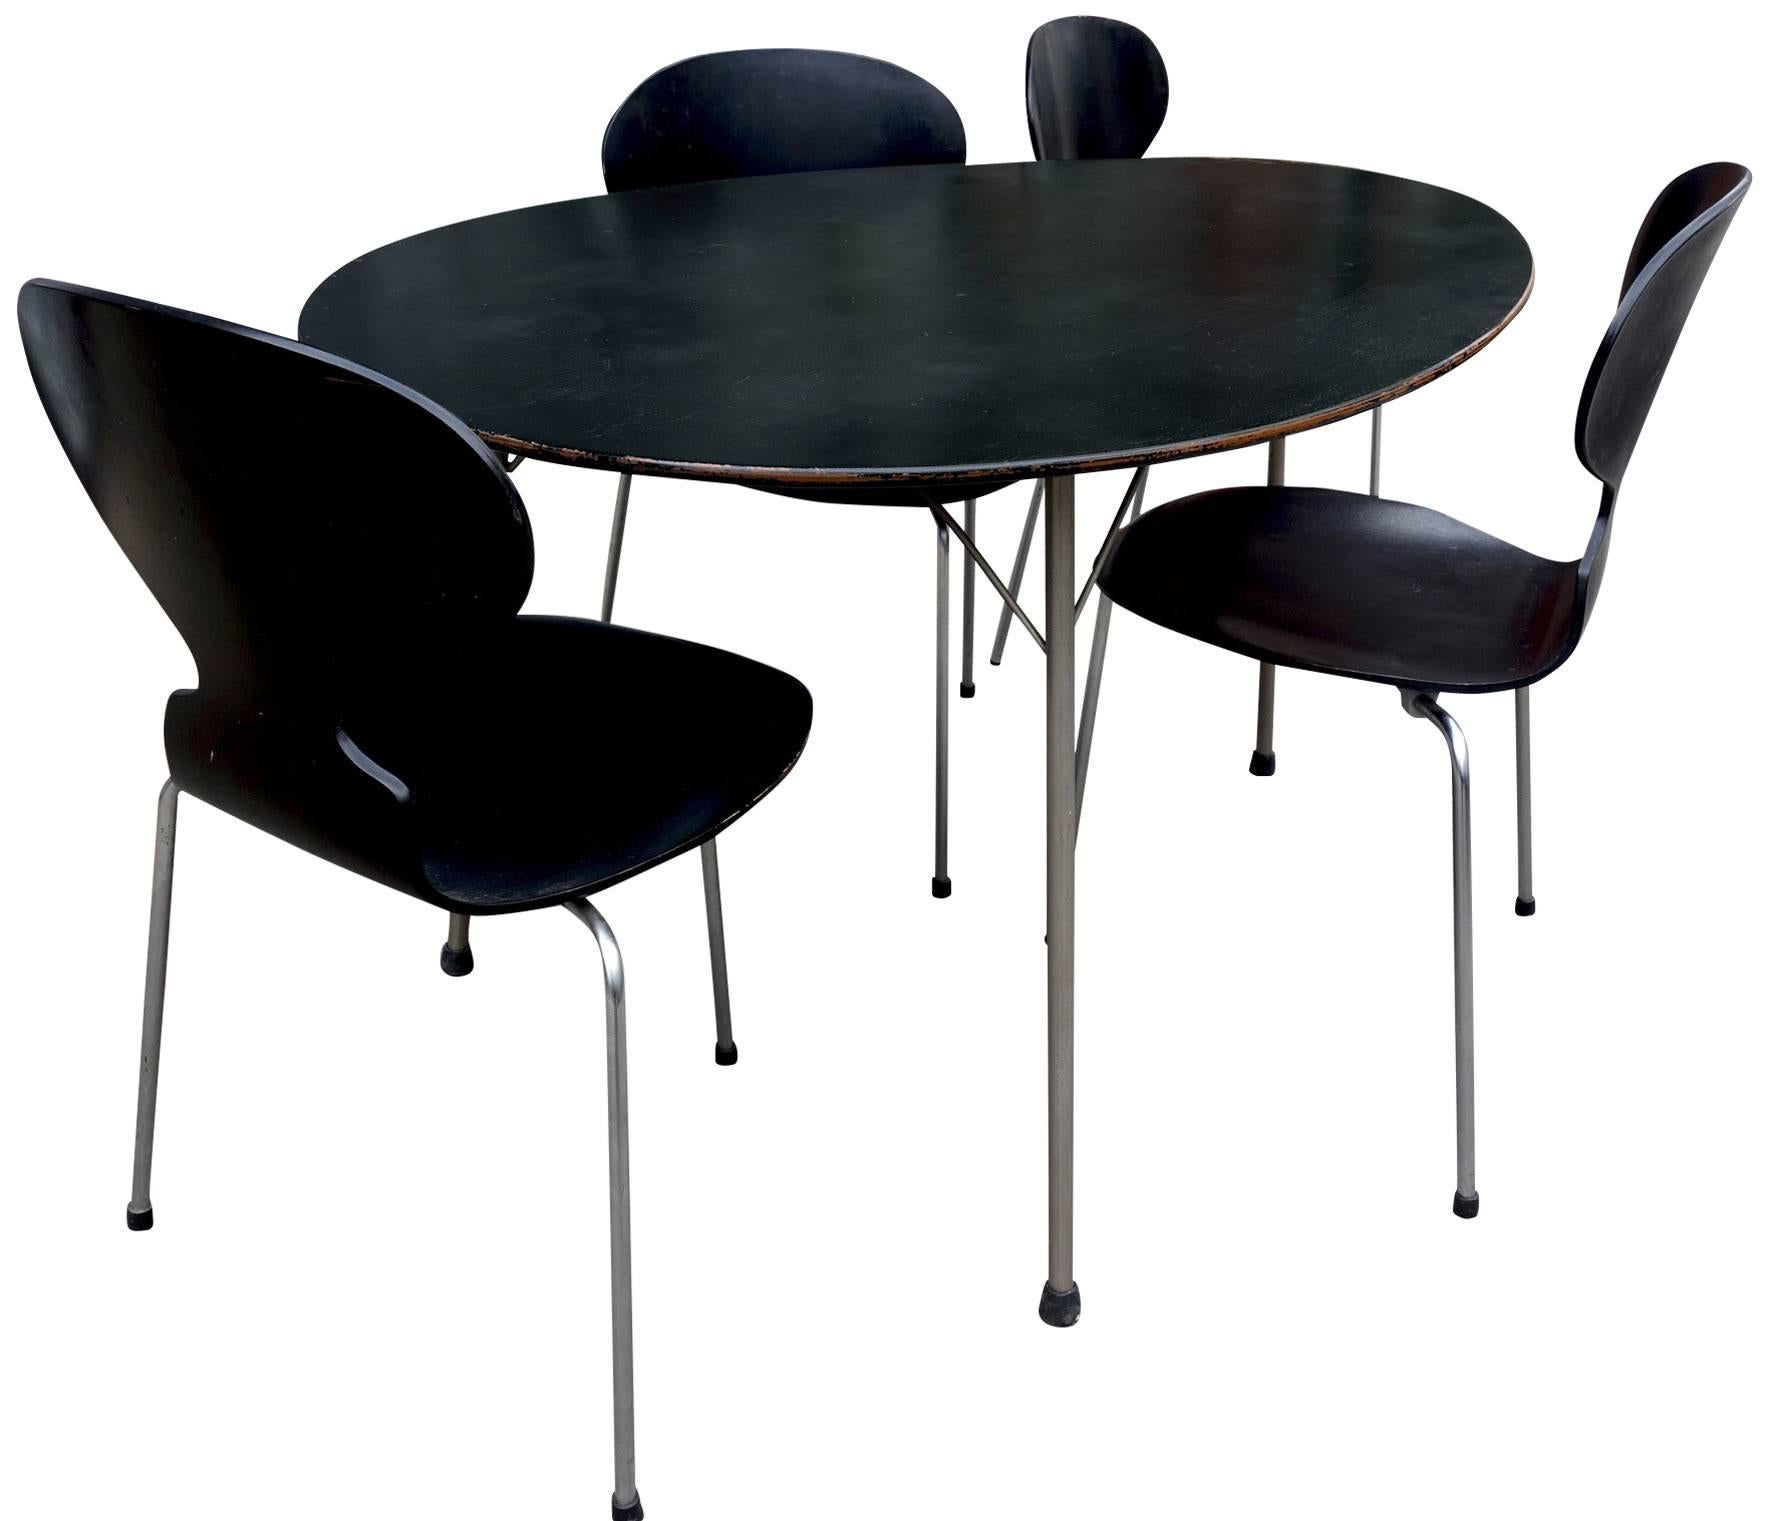 For your consideration is this wonderful kitchen table or dining room set. The Egg table is visual genius with such a relatable / recognizable organic form. Perfectly paired with four-three legged Ant chairs. This grouping was originally purchased